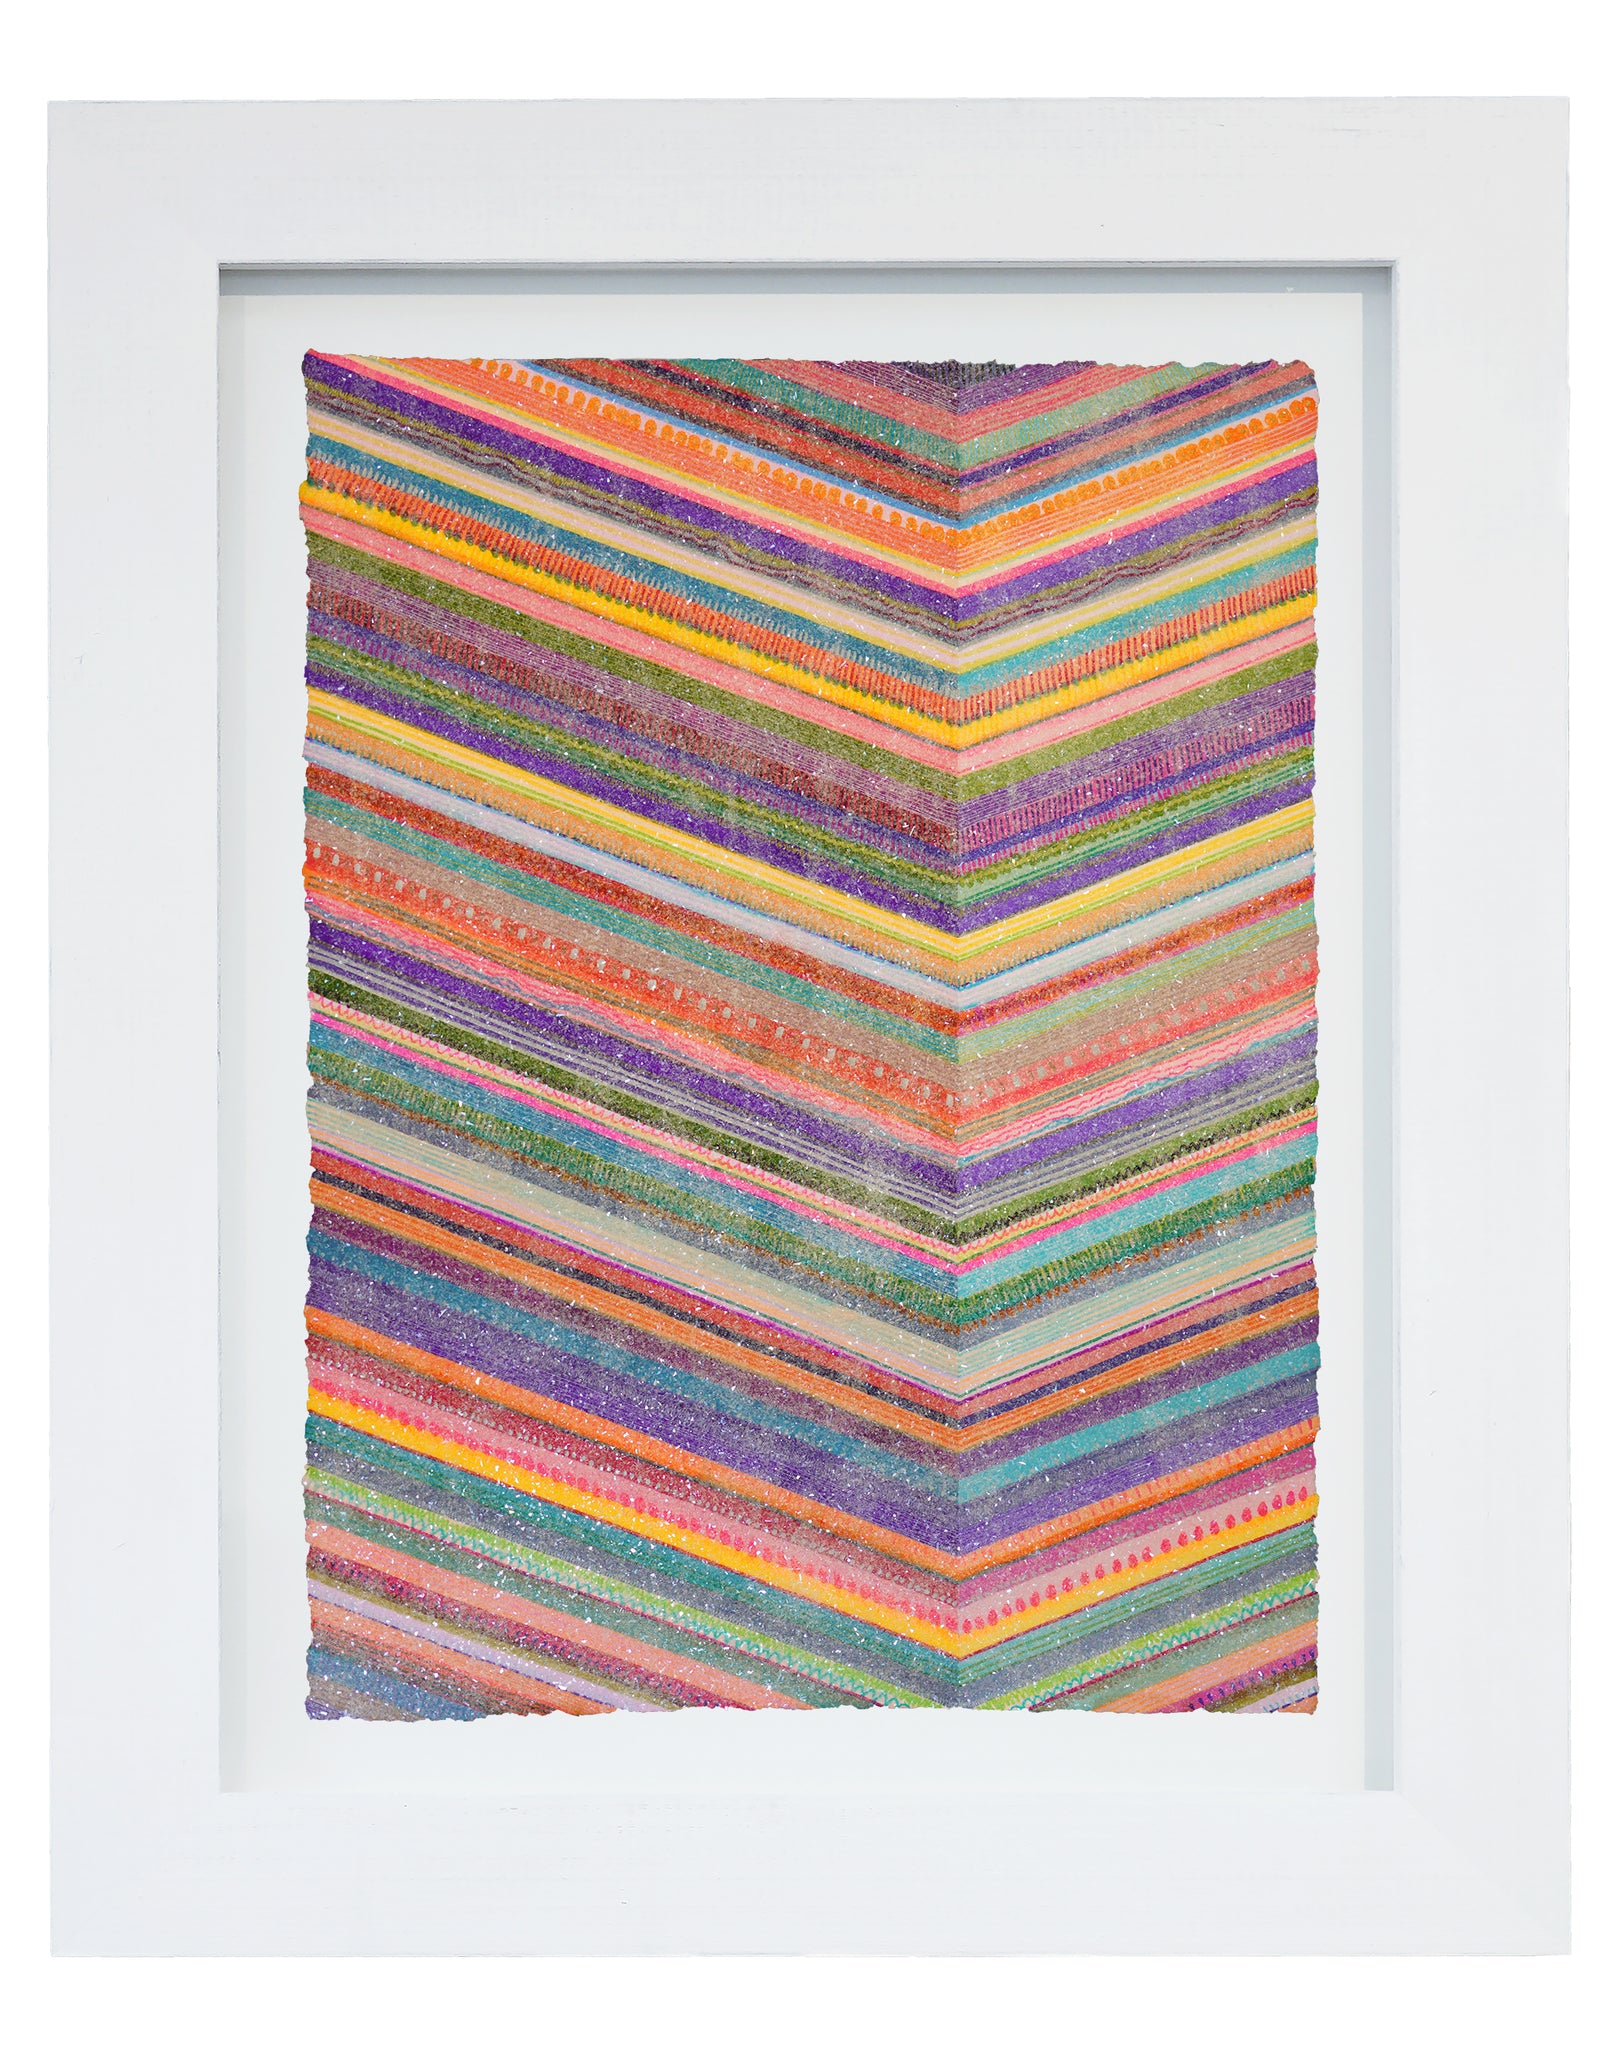 Lineation No. 17 -36" X 28" Framed